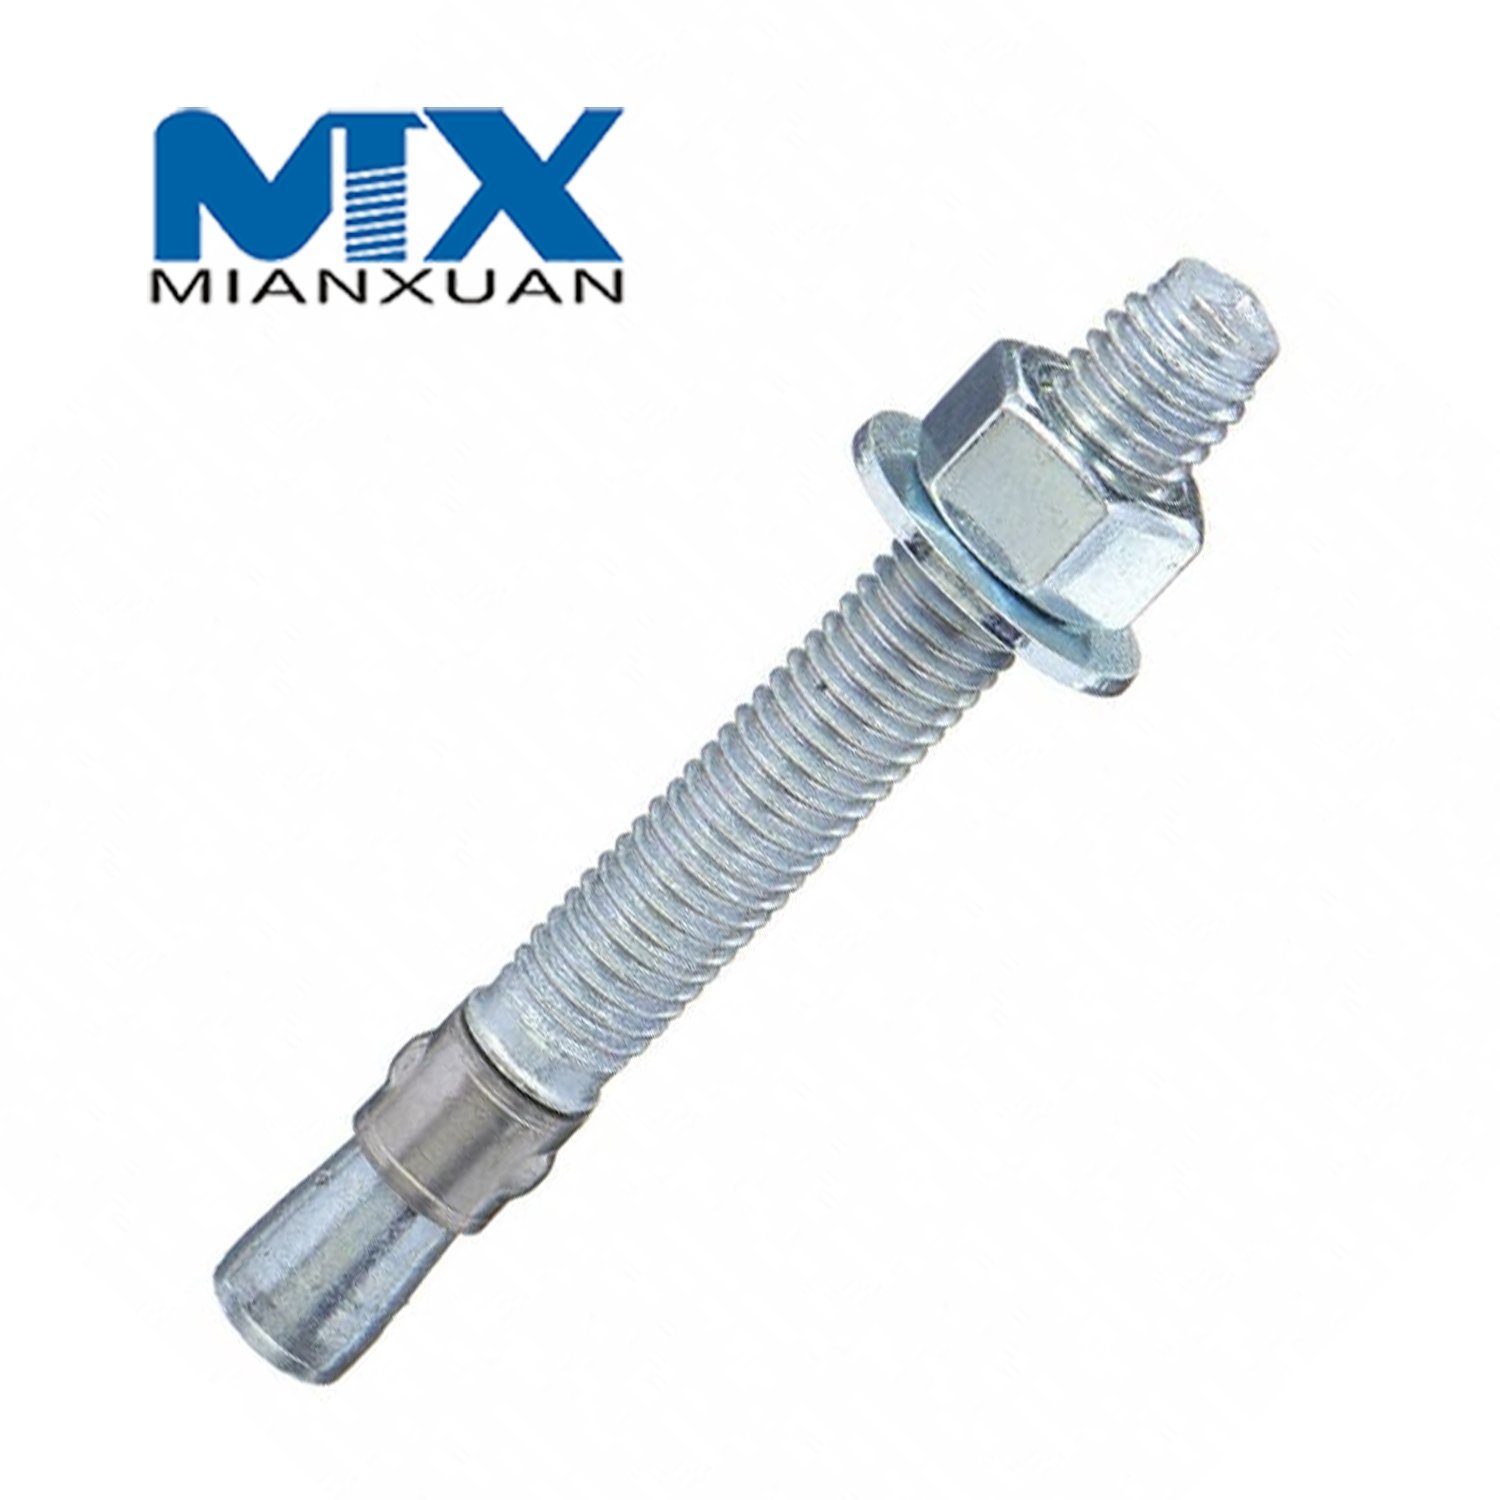 High Quality Stainless Steel Carbon Steel Fastener Expansion Anchor for Concrete Brick